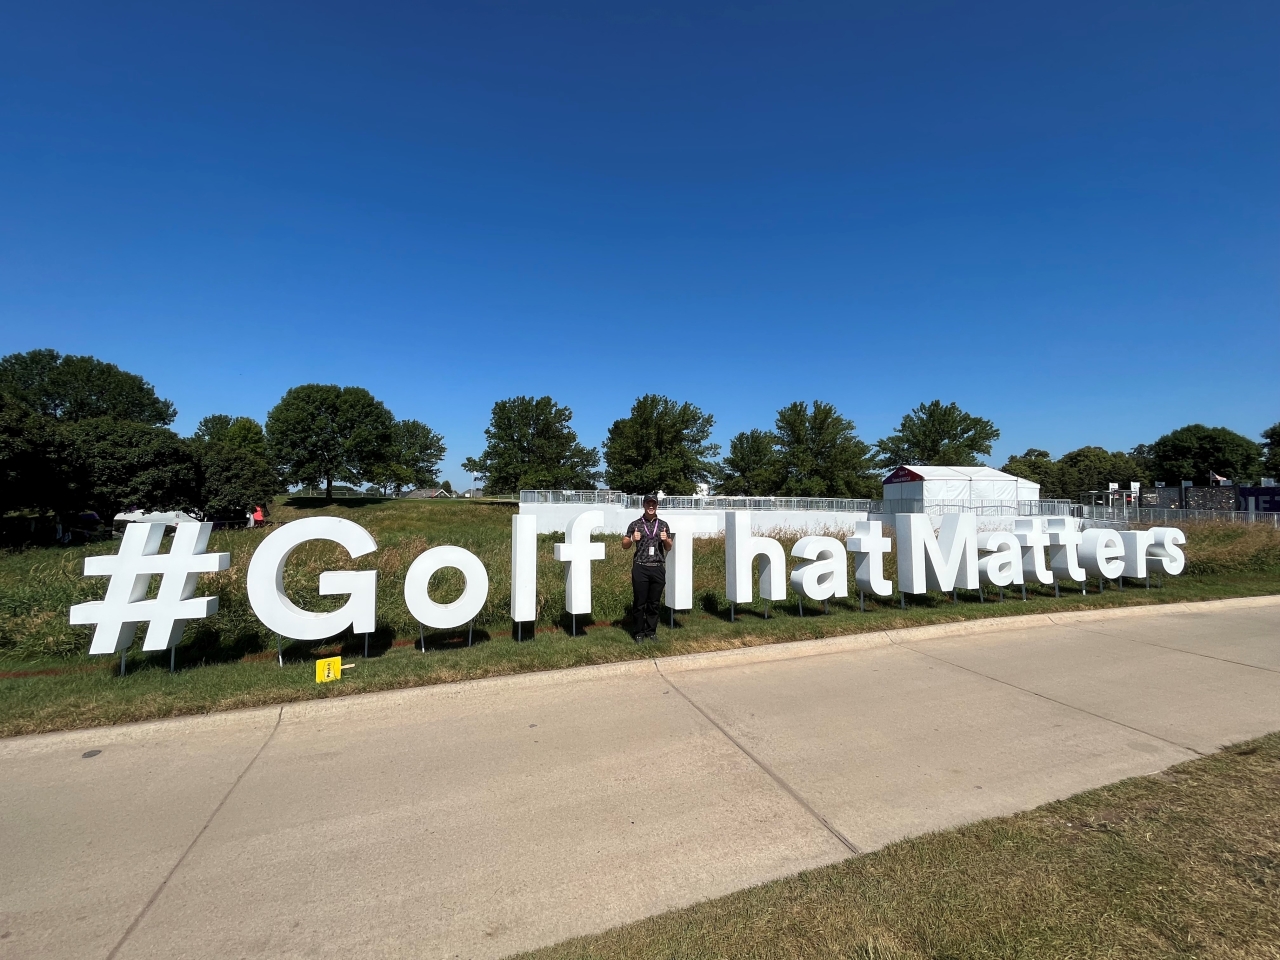 #Golf That Matters sign